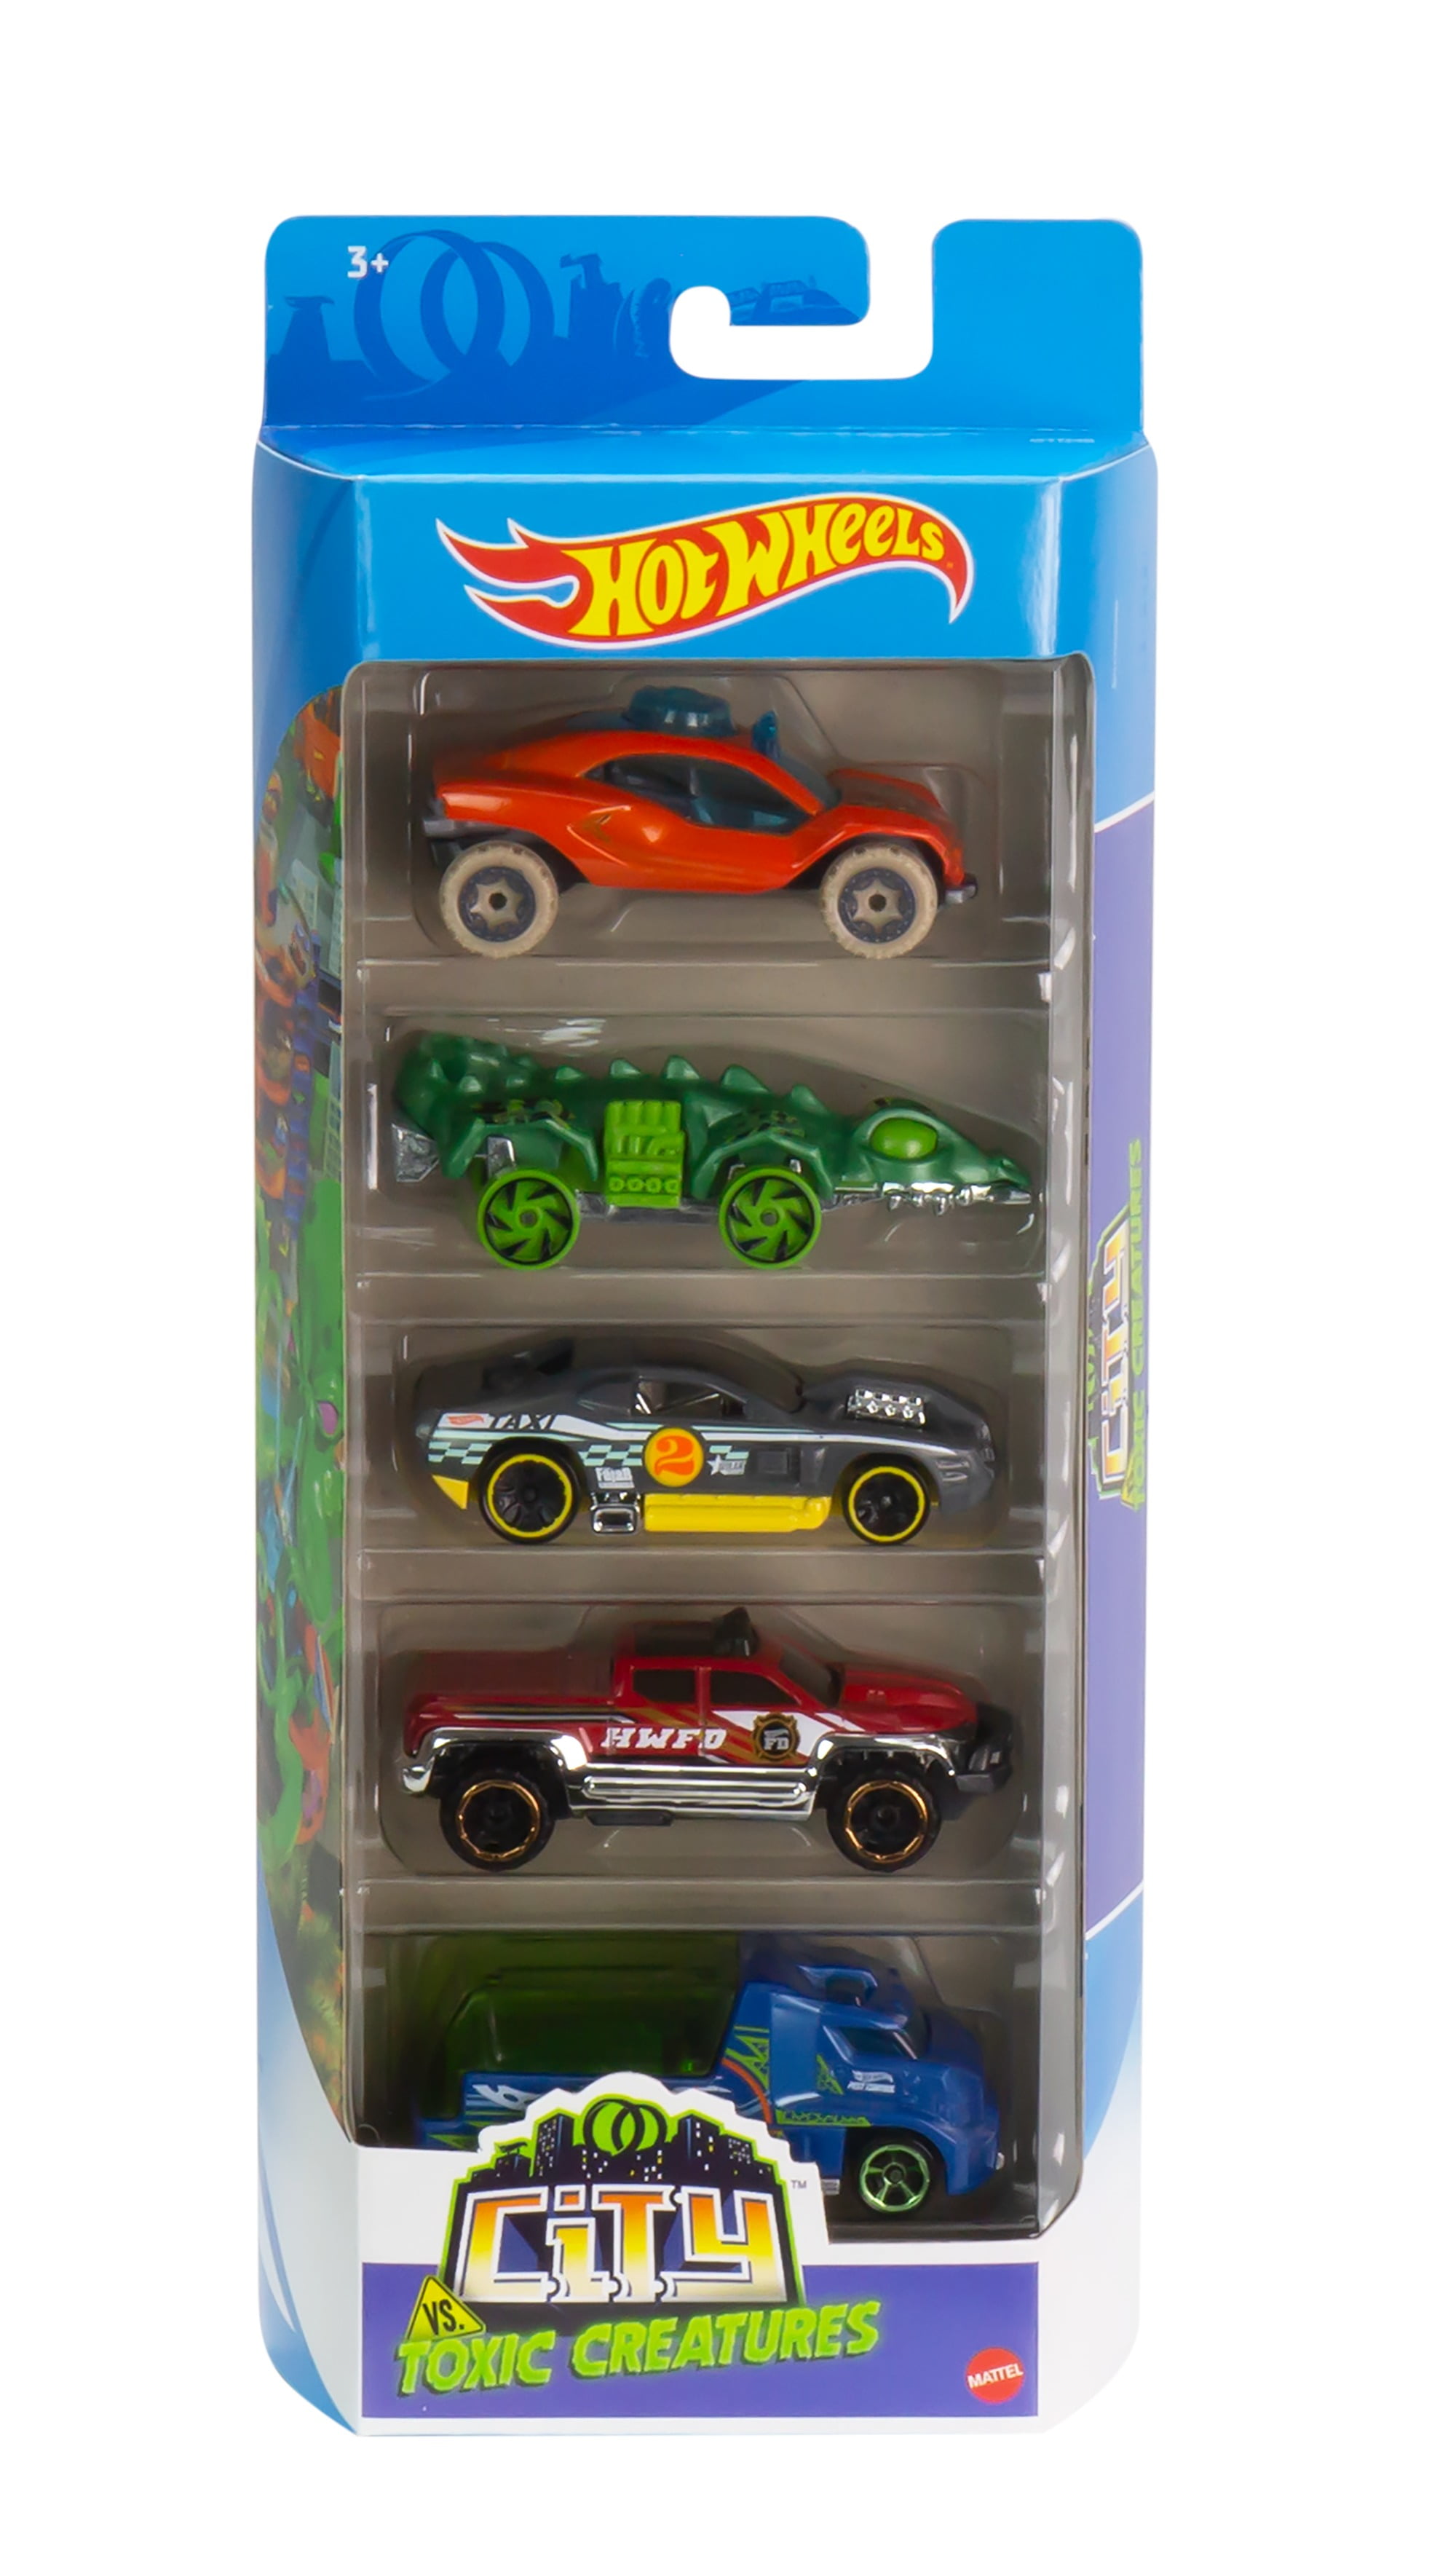 Hot Wheels 2020 HW Police Series 5 Cars Walmart Exclusive  *SOCALSURF619* 5 Details about   